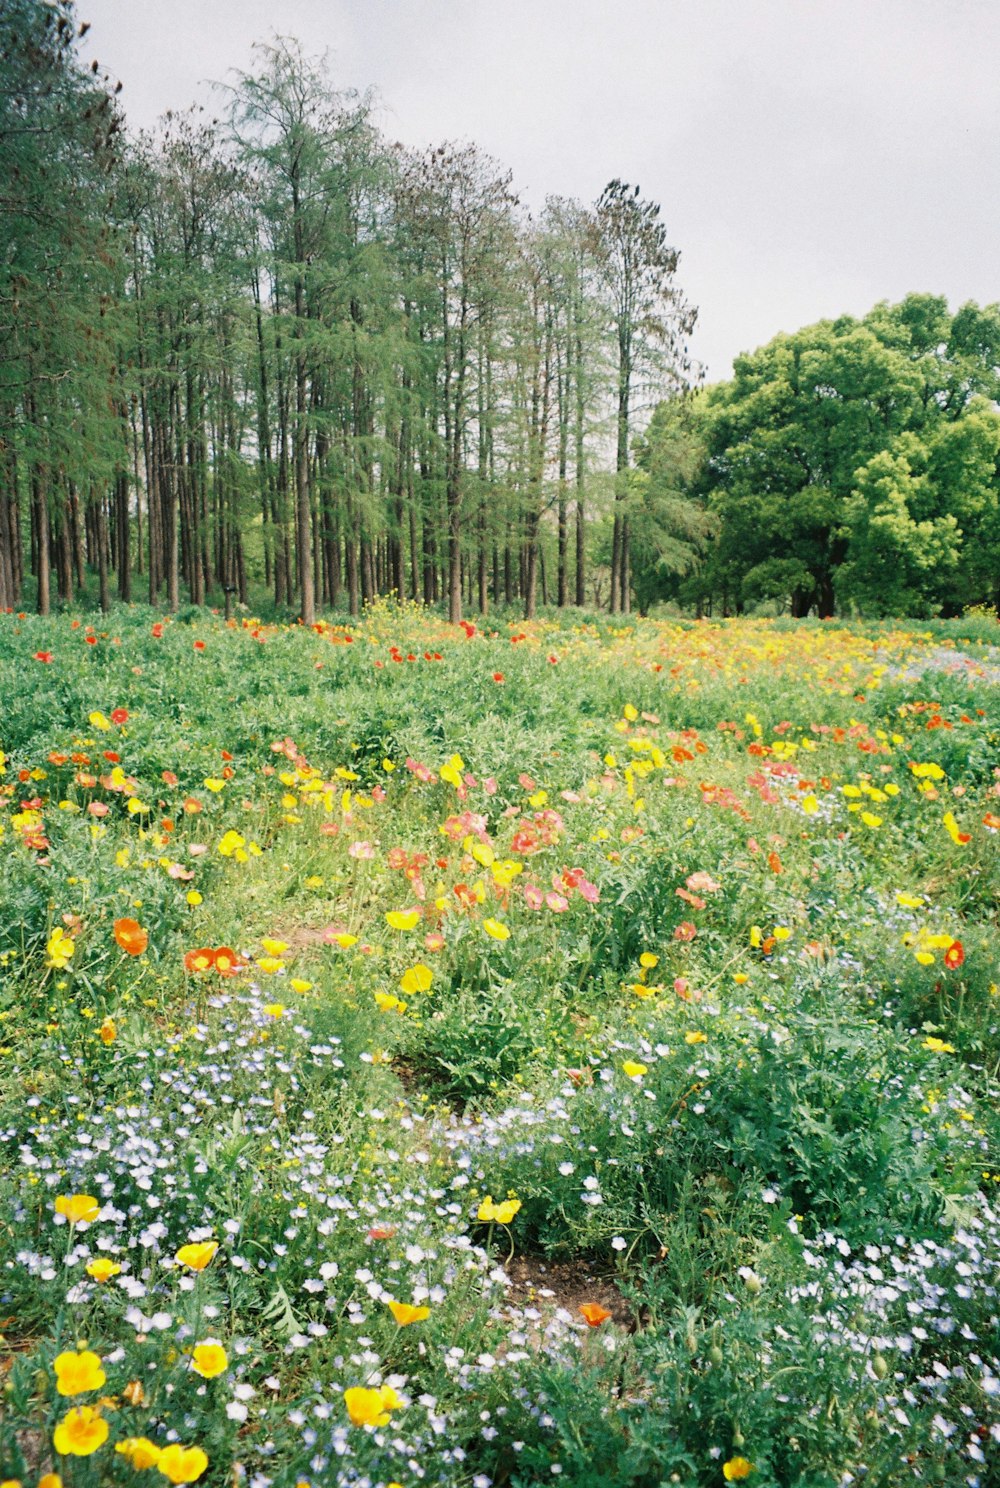 a field full of flowers and trees in the background